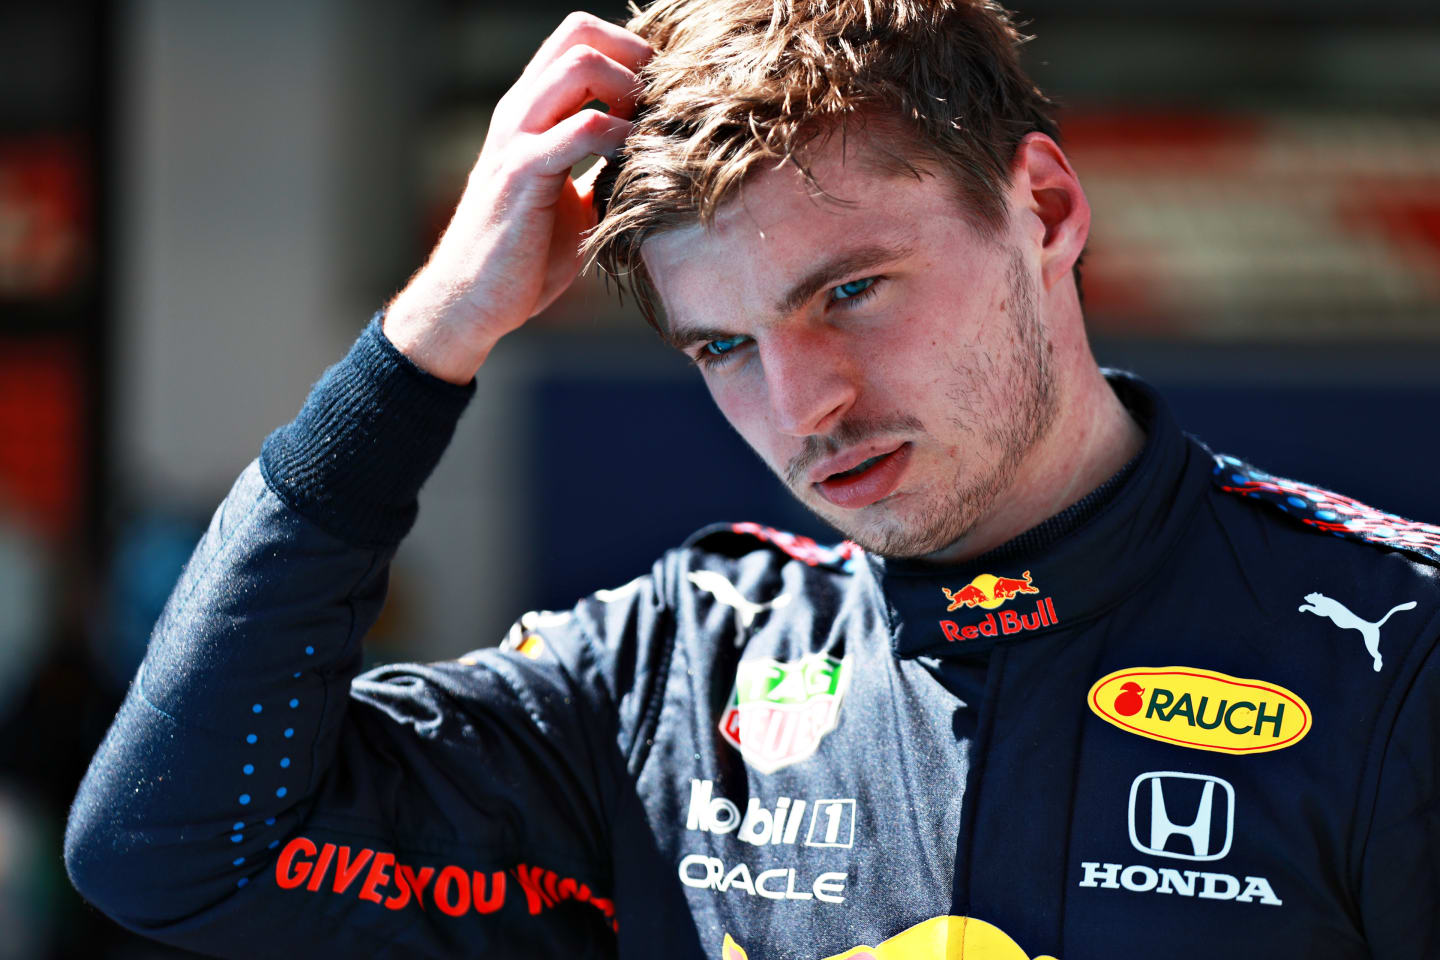 BARCELONA, SPAIN - MAY 08: Second place qualifier Max Verstappen of Netherlands and Red Bull Racing looks on in parc ferme during qualifying for the F1 Grand Prix of Spain at Circuit de Barcelona-Catalunya on May 08, 2021 in Barcelona, Spain. (Photo by Mark Thompson/Getty Images)